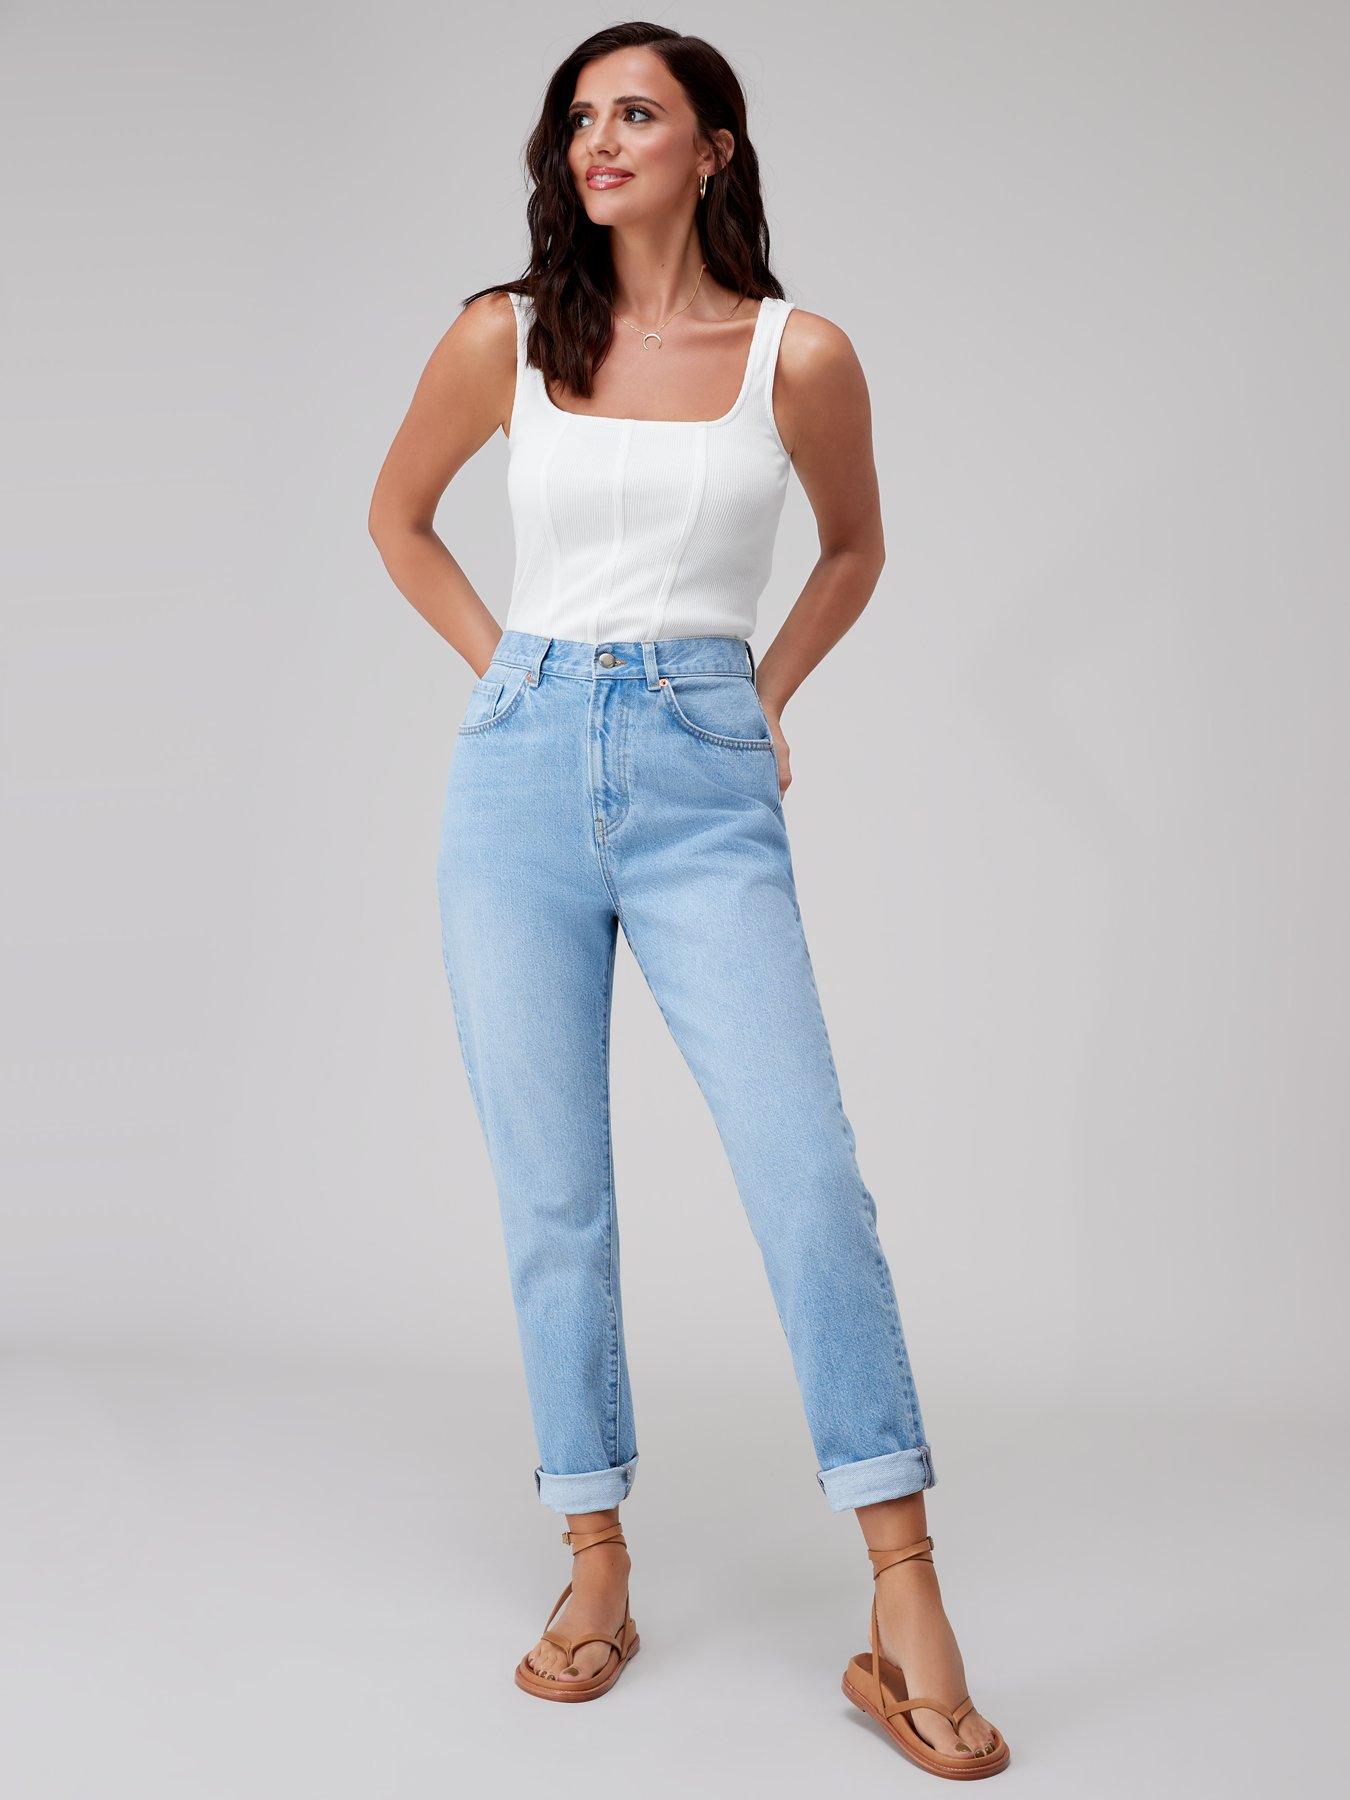 Lucy Mecklenburgh Lucy Mecklenburgh x V by Very Slim Leg Ankle Grazer Jean  - Blue